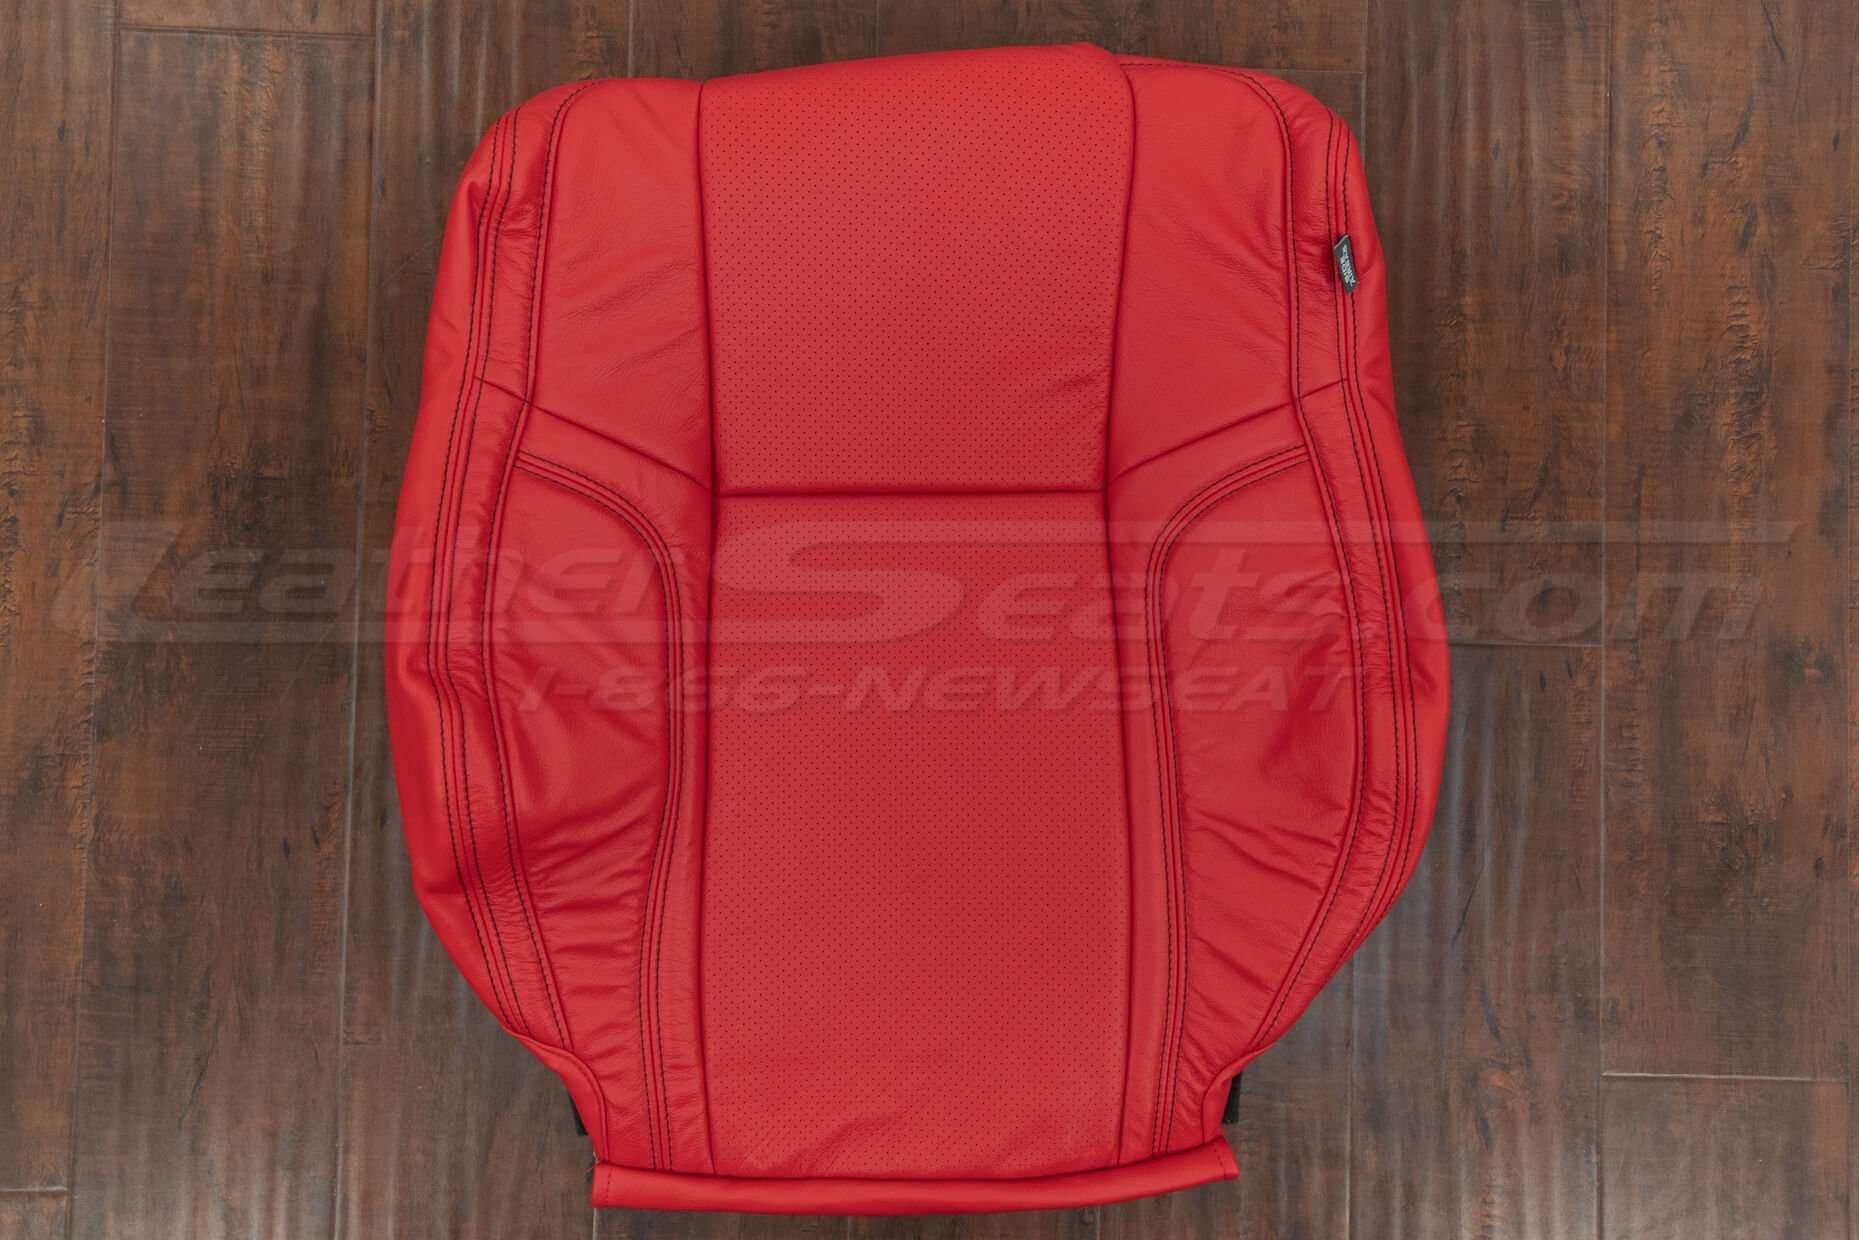 Dodge Challenger Hellcat front backrest upholstery in Bright Red